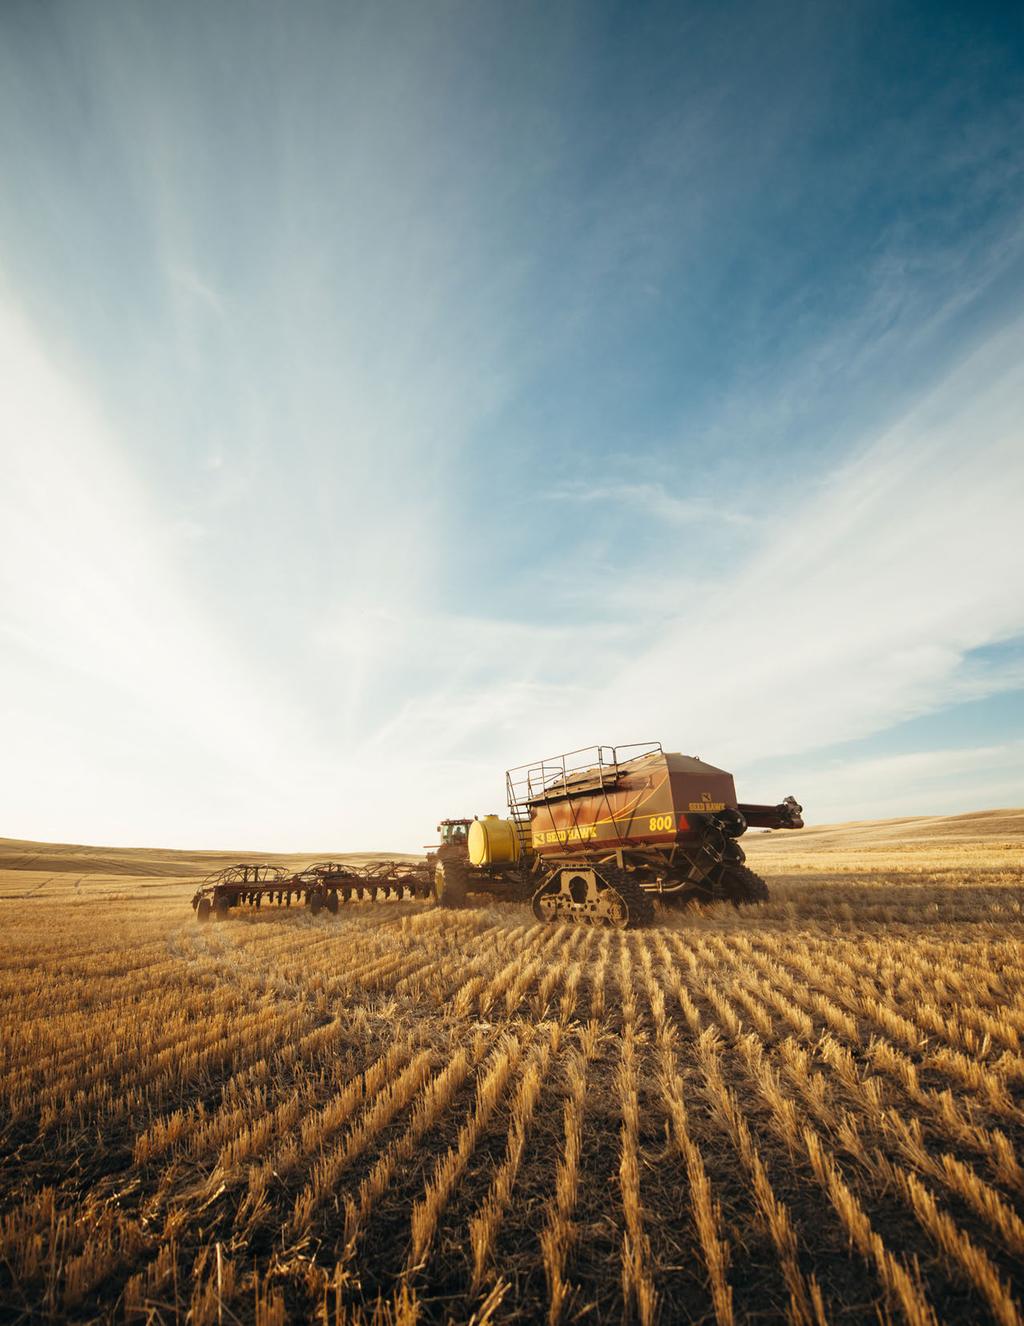 CLEAN AIR, CLEAN WATER, CLEAN LAND. Minimal tillage technologies reduce soil disruption, keeping Canada s land nutrient rich to produce high-quality crops.